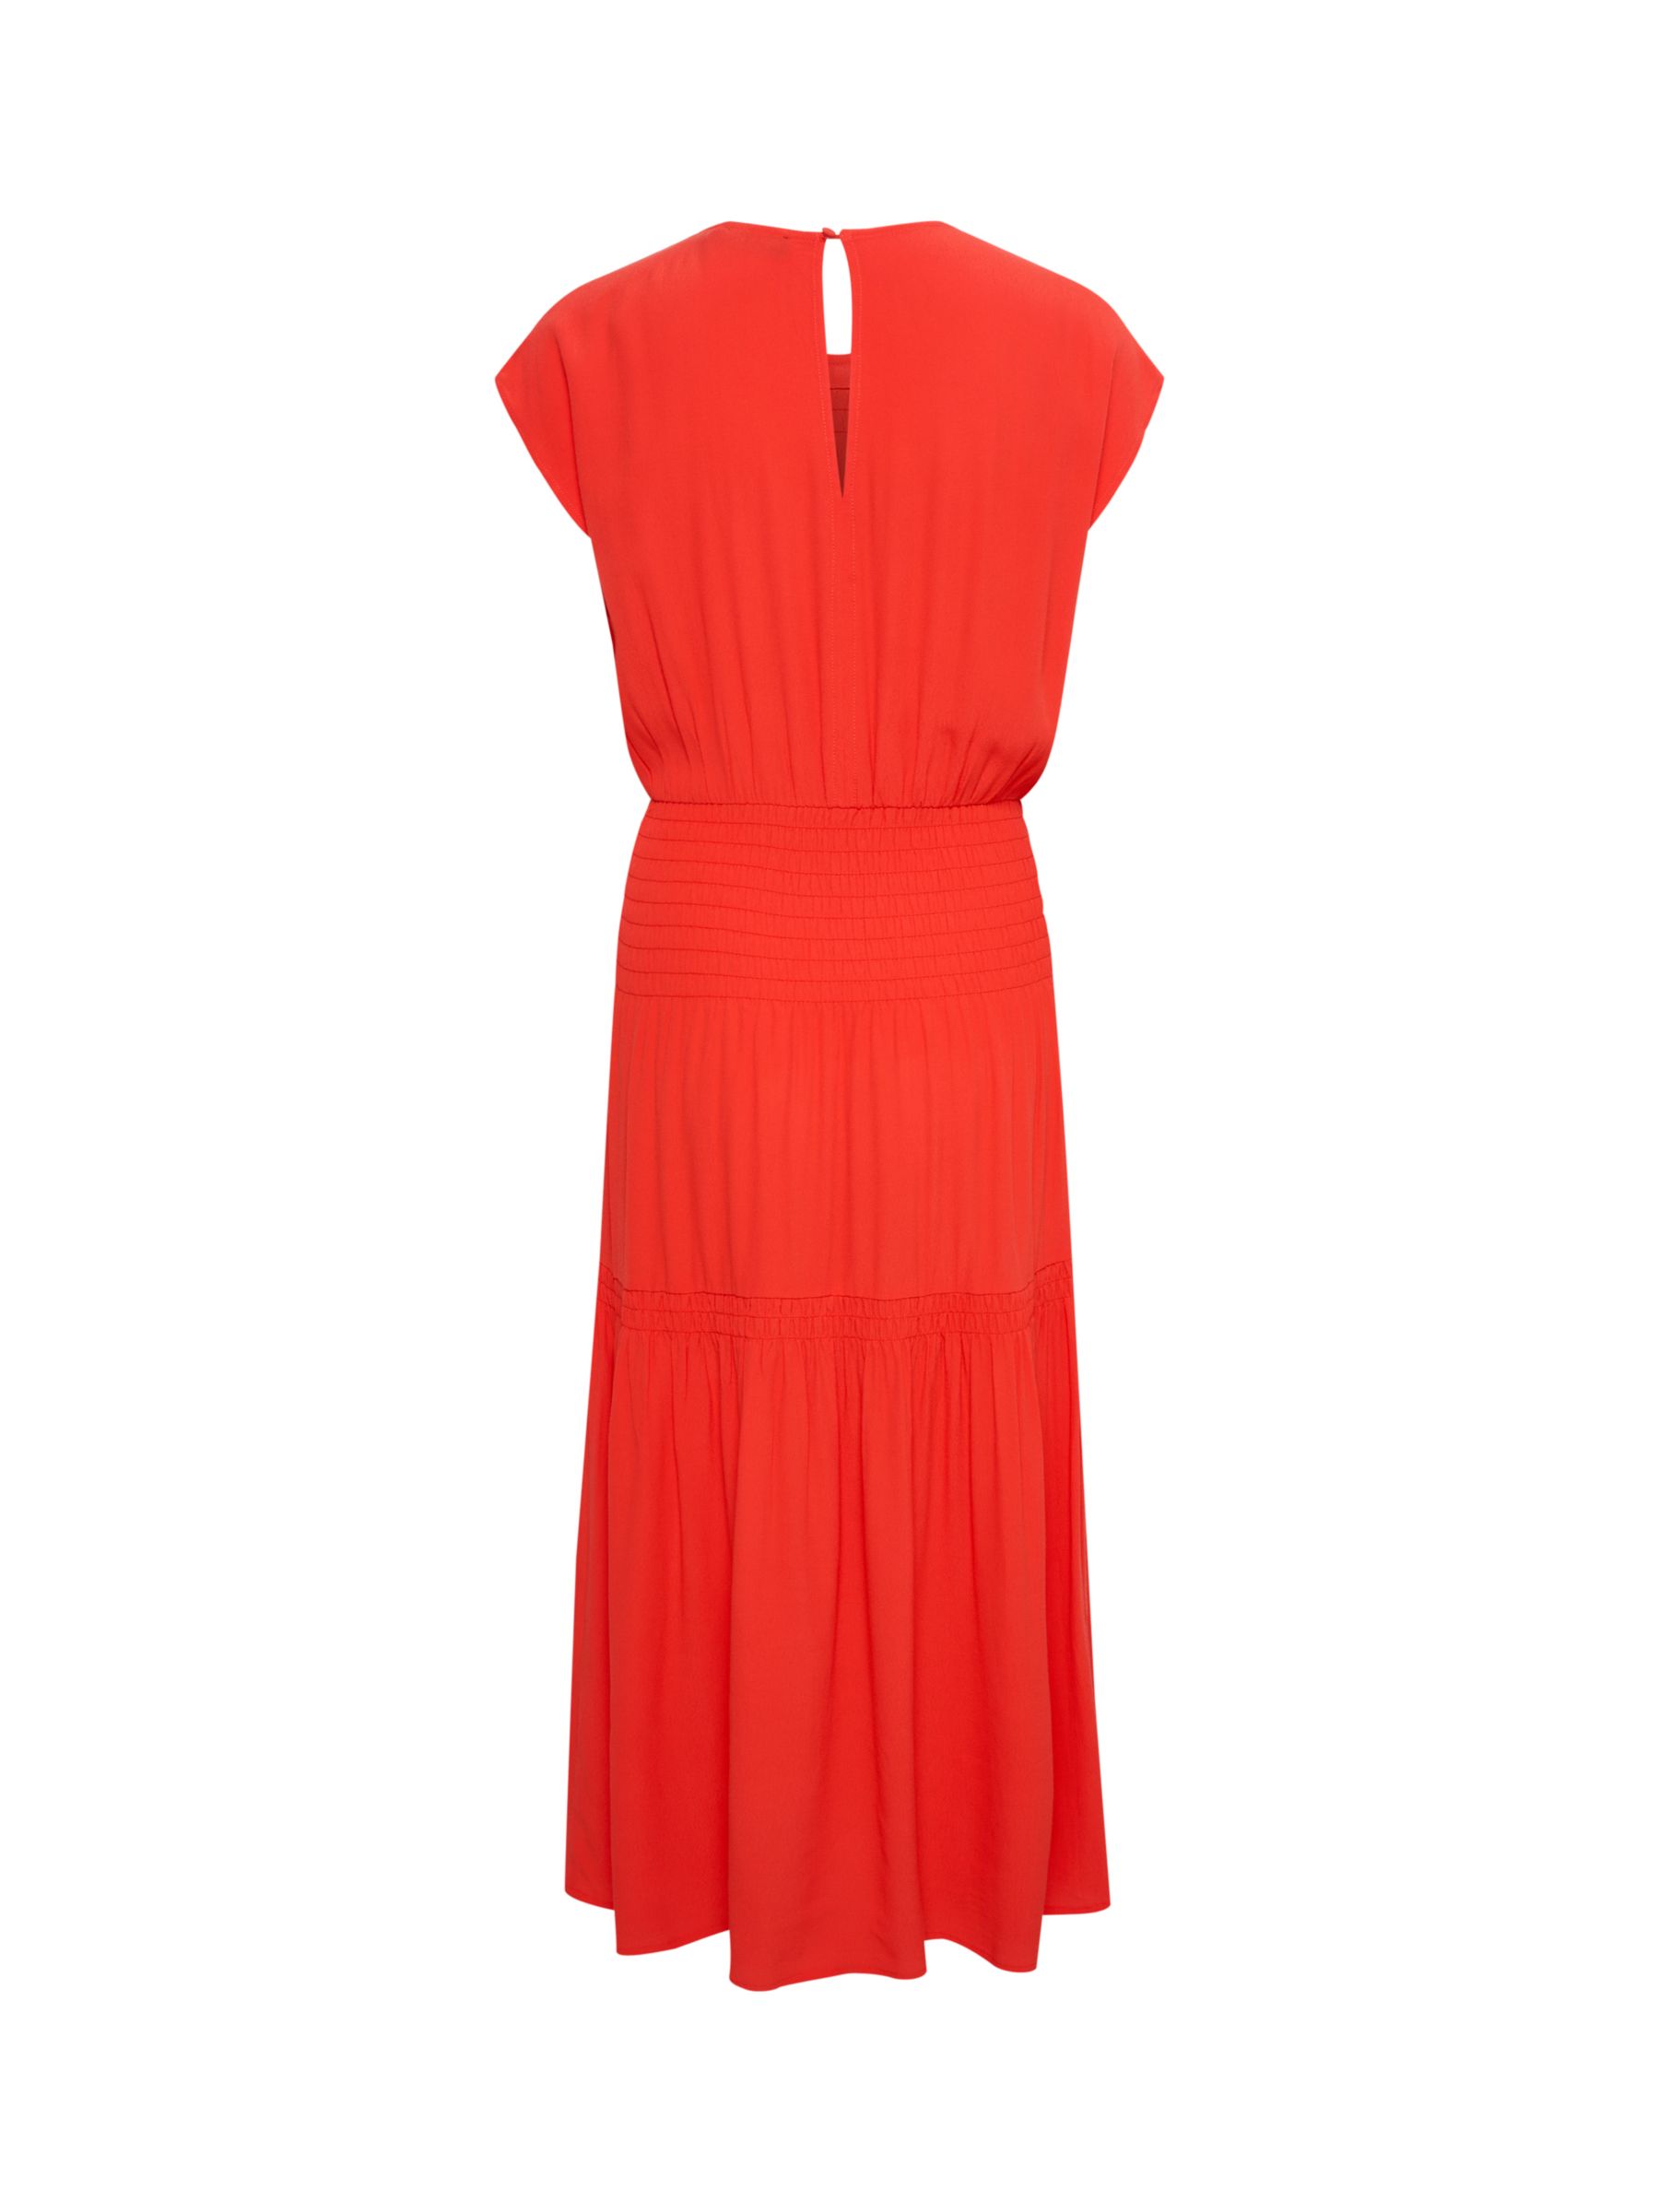 Buy Soaked In Luxury Layna Dress Online at johnlewis.com